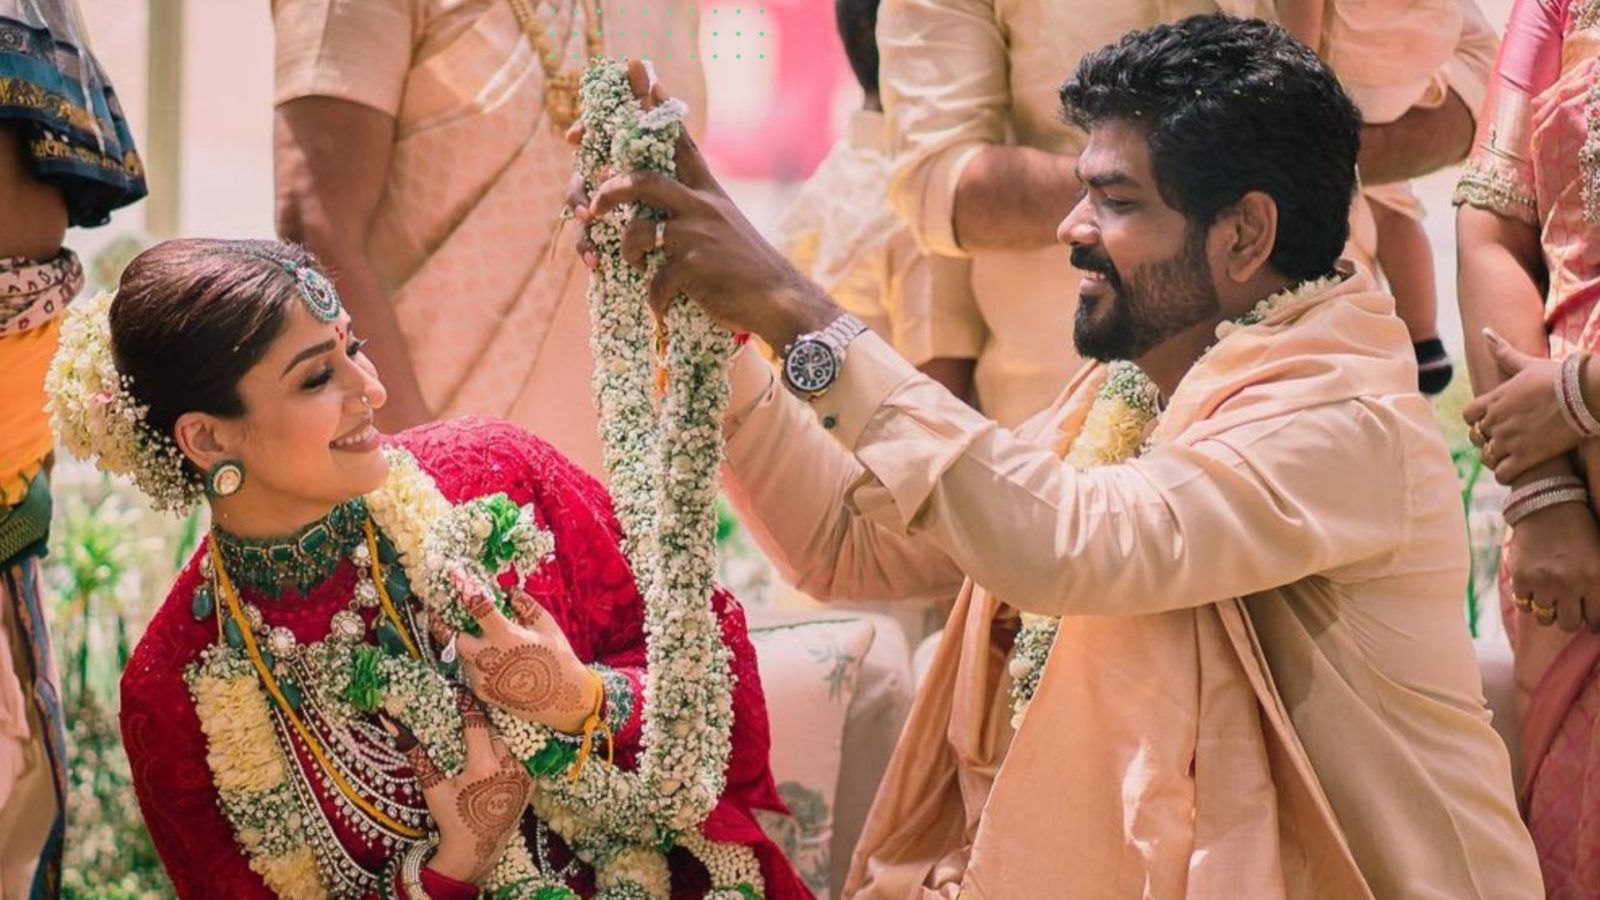 Nayanthara, Vignesh Shivan are married! Check out the dreamy pictures from the wedding